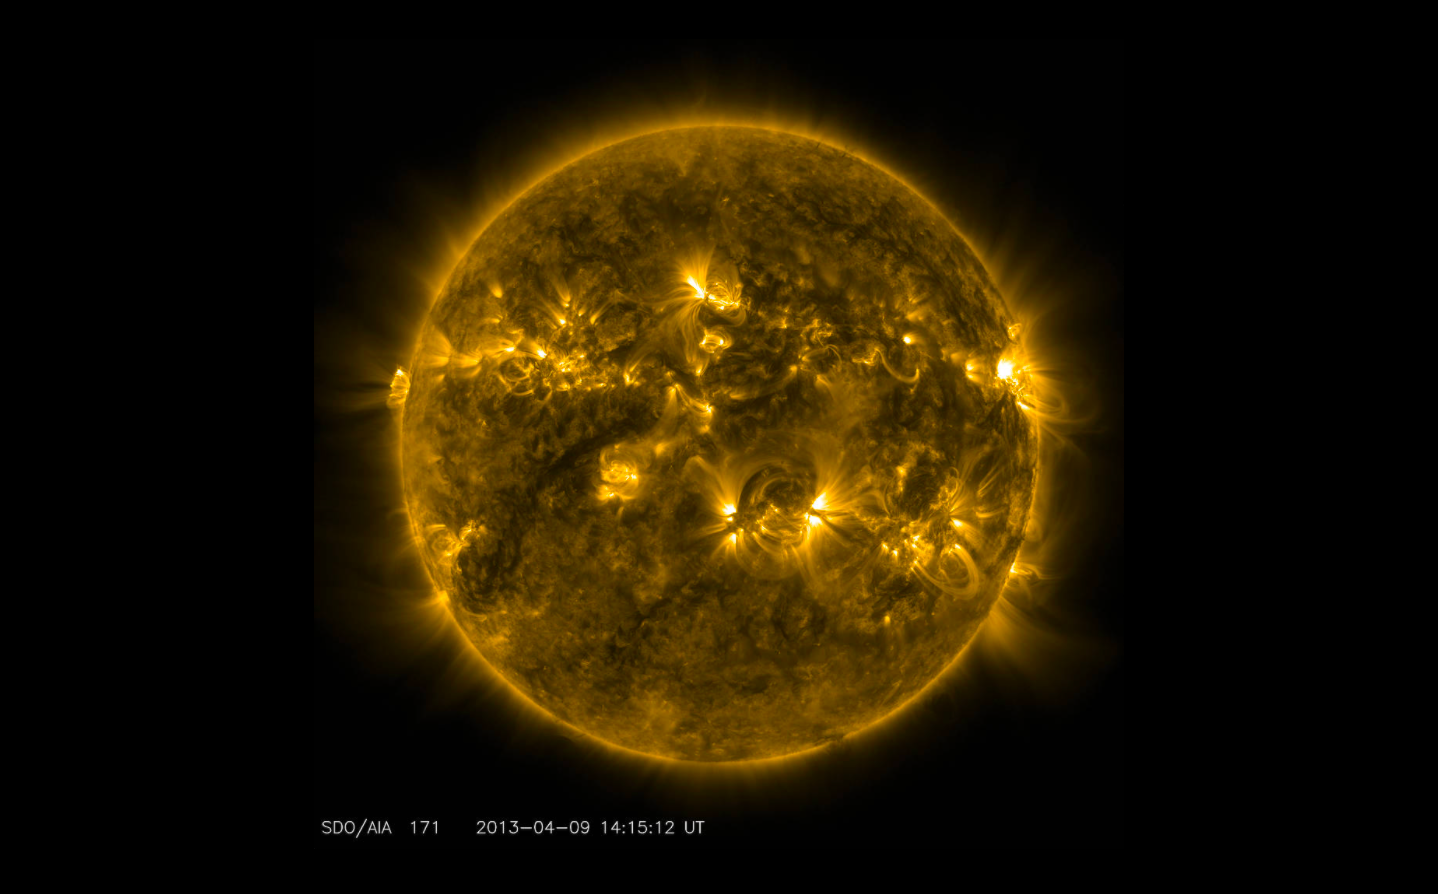 How Do We Know When the Sun Will Die?